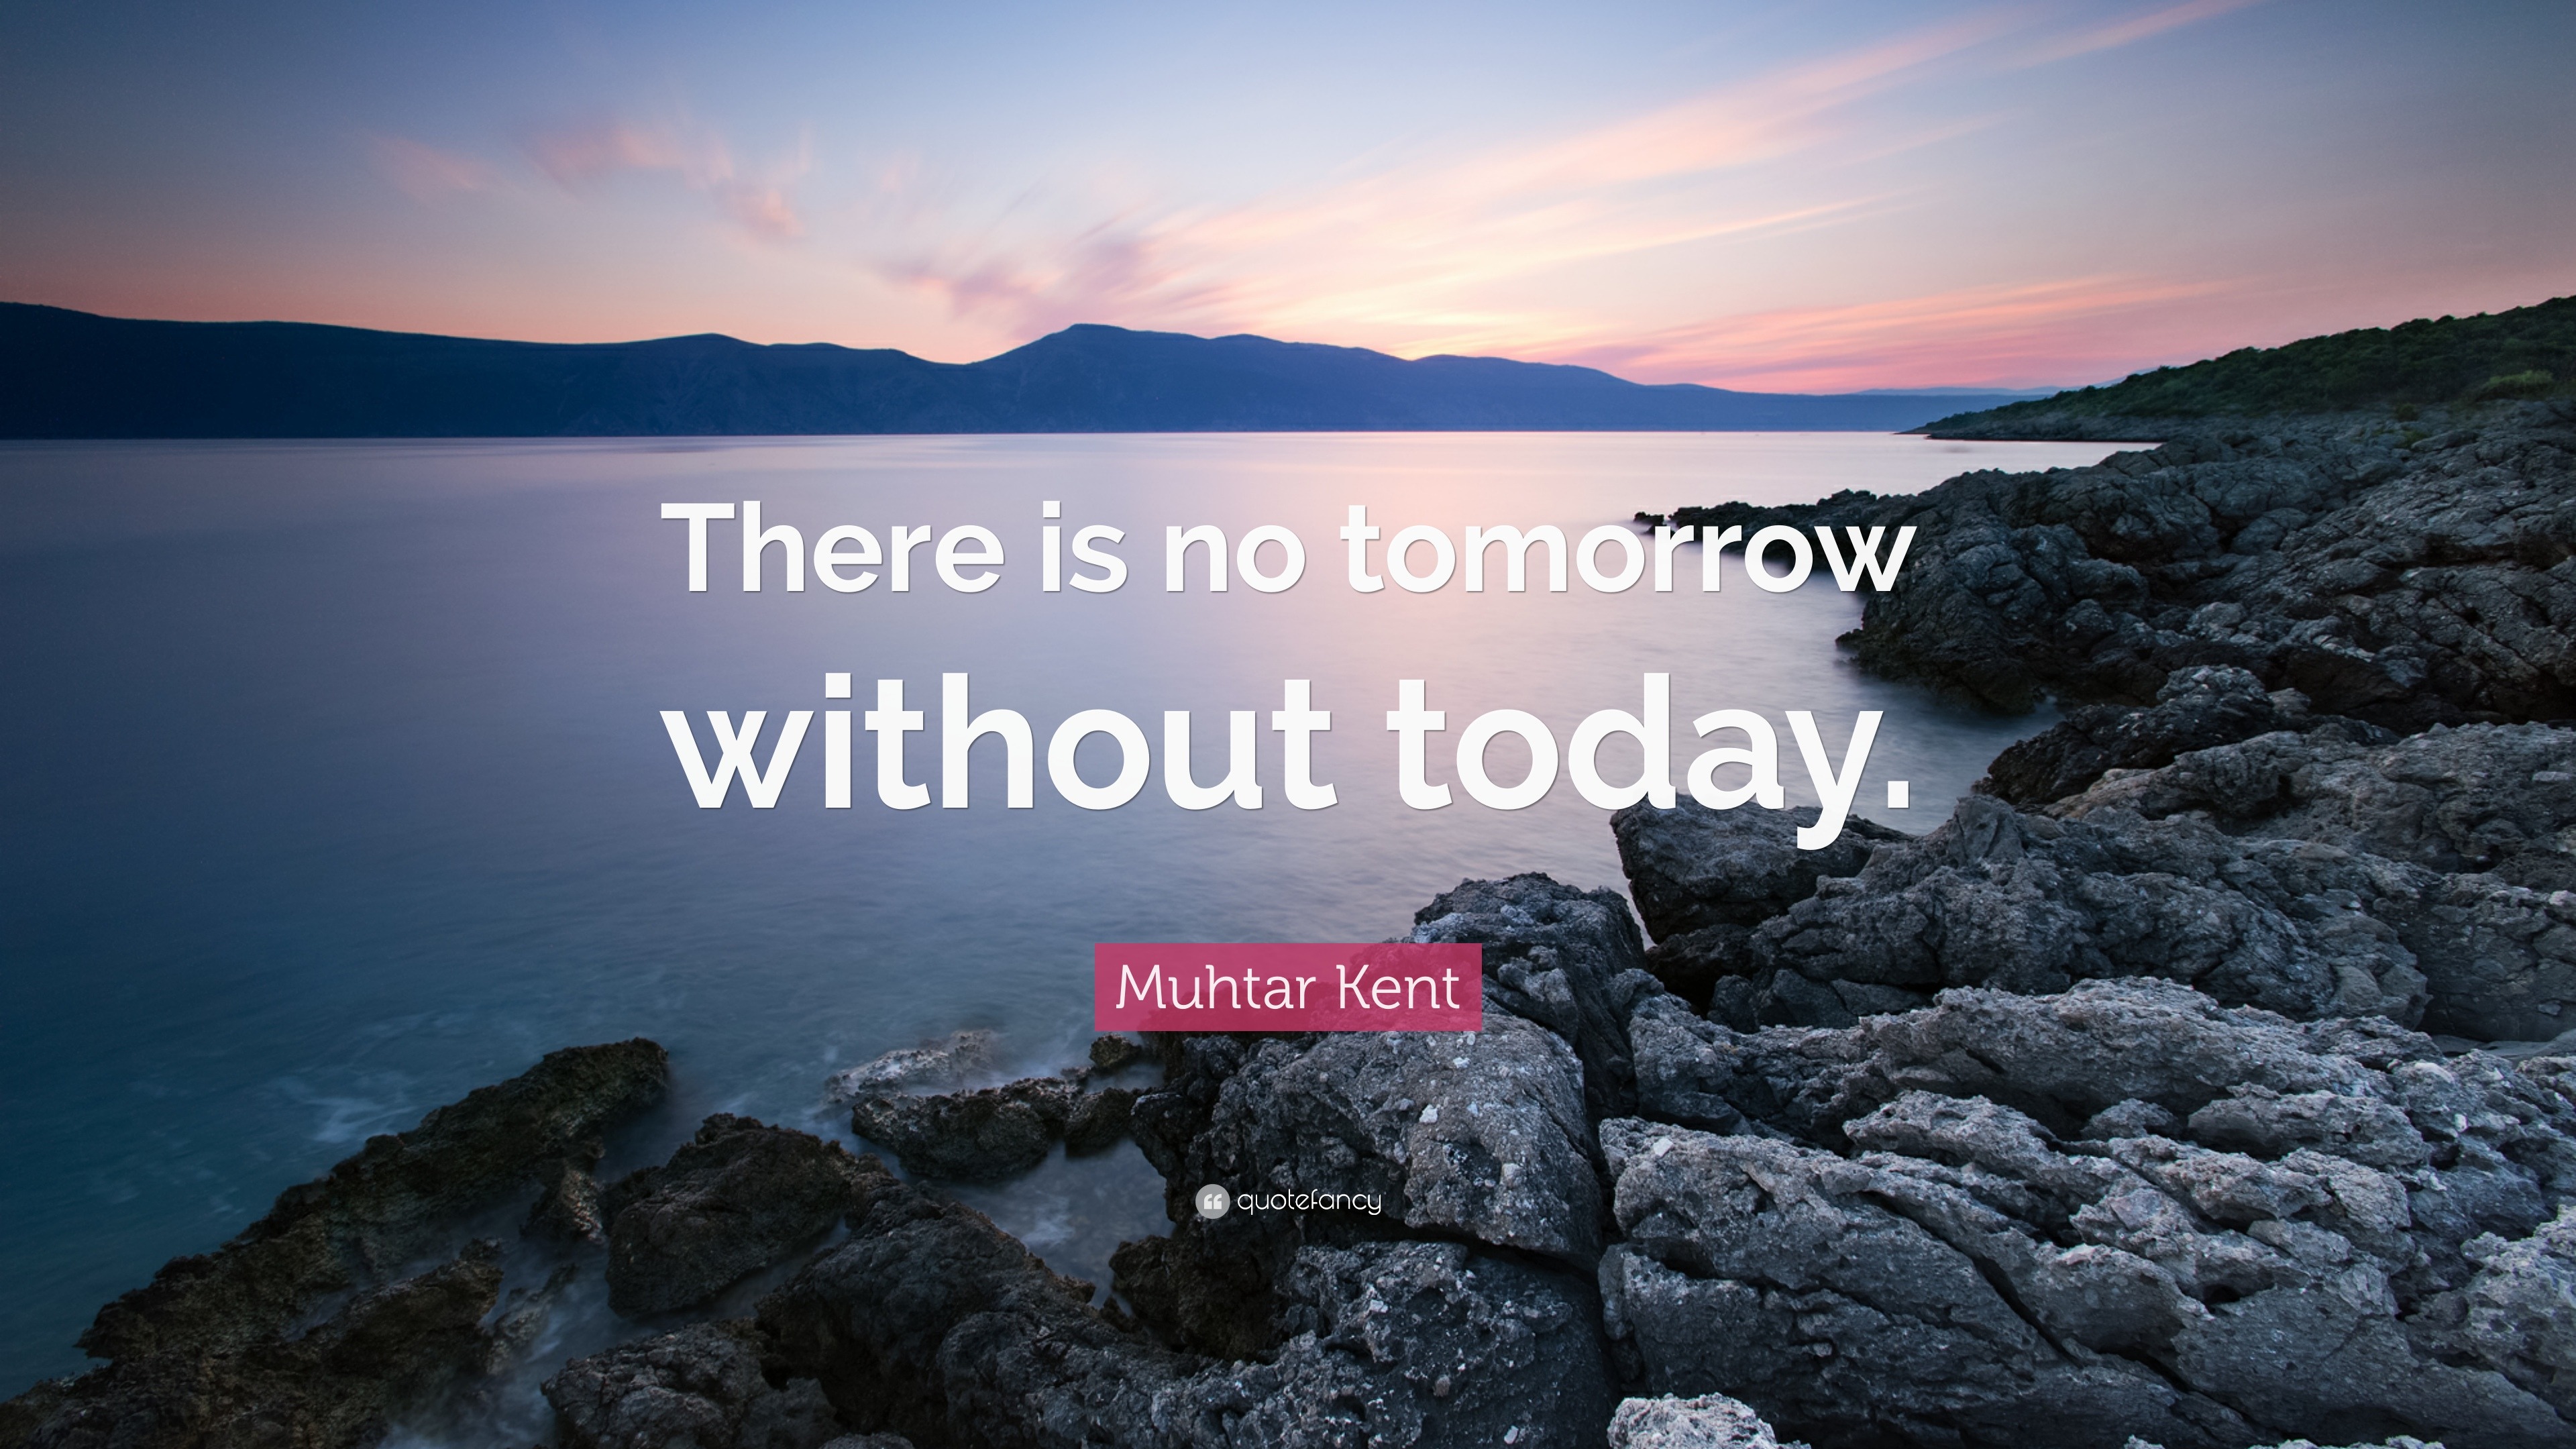 Muhtar Kent Quote There Is No Tomorrow Without Today 10 Wallpapers Quotefancy